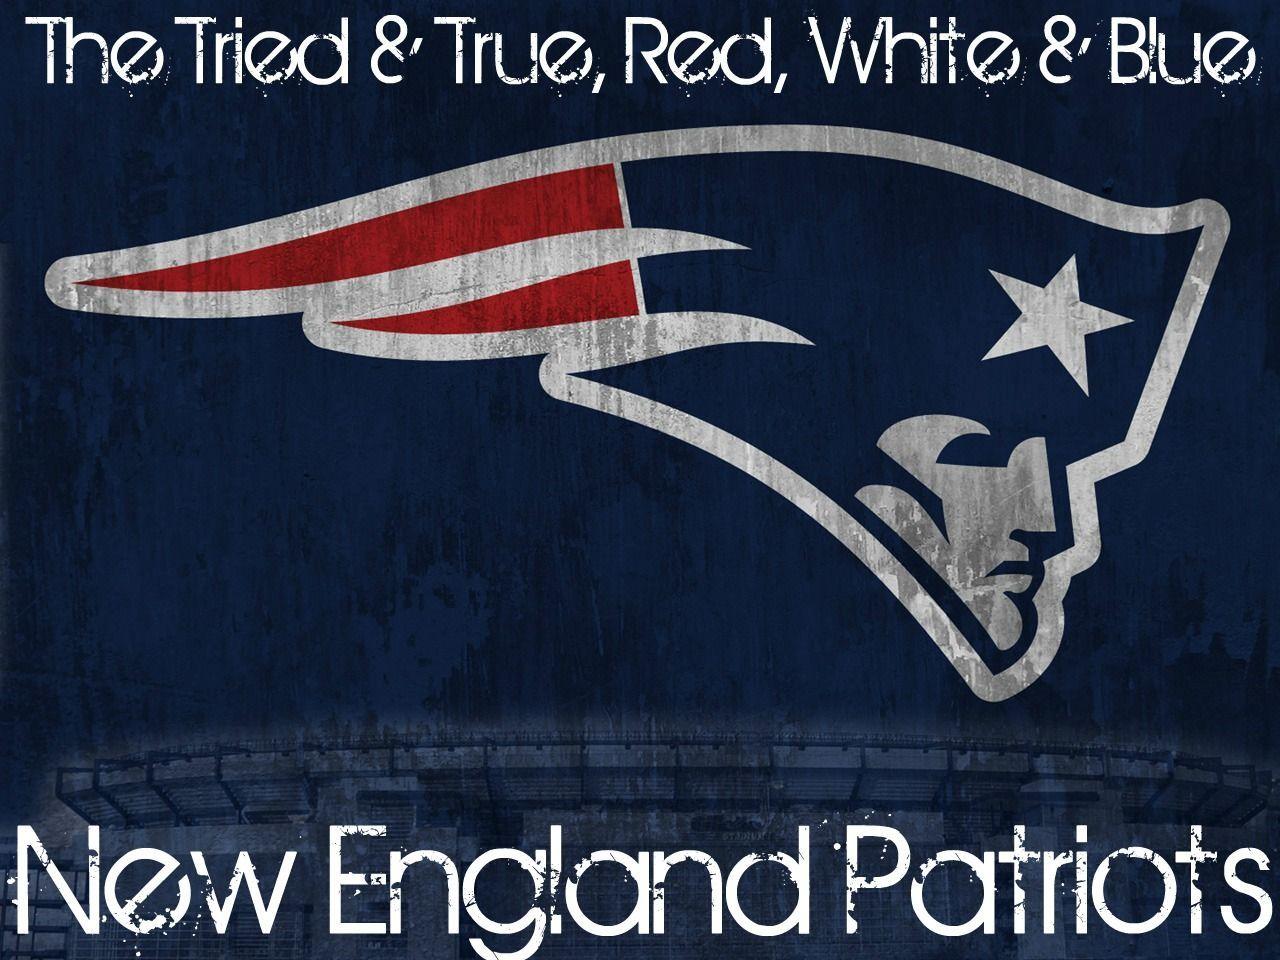 Red White and Blue Patriot Logo - The Tried & True, Red, White & Blue... #Patriots | Patriots Graphics ...